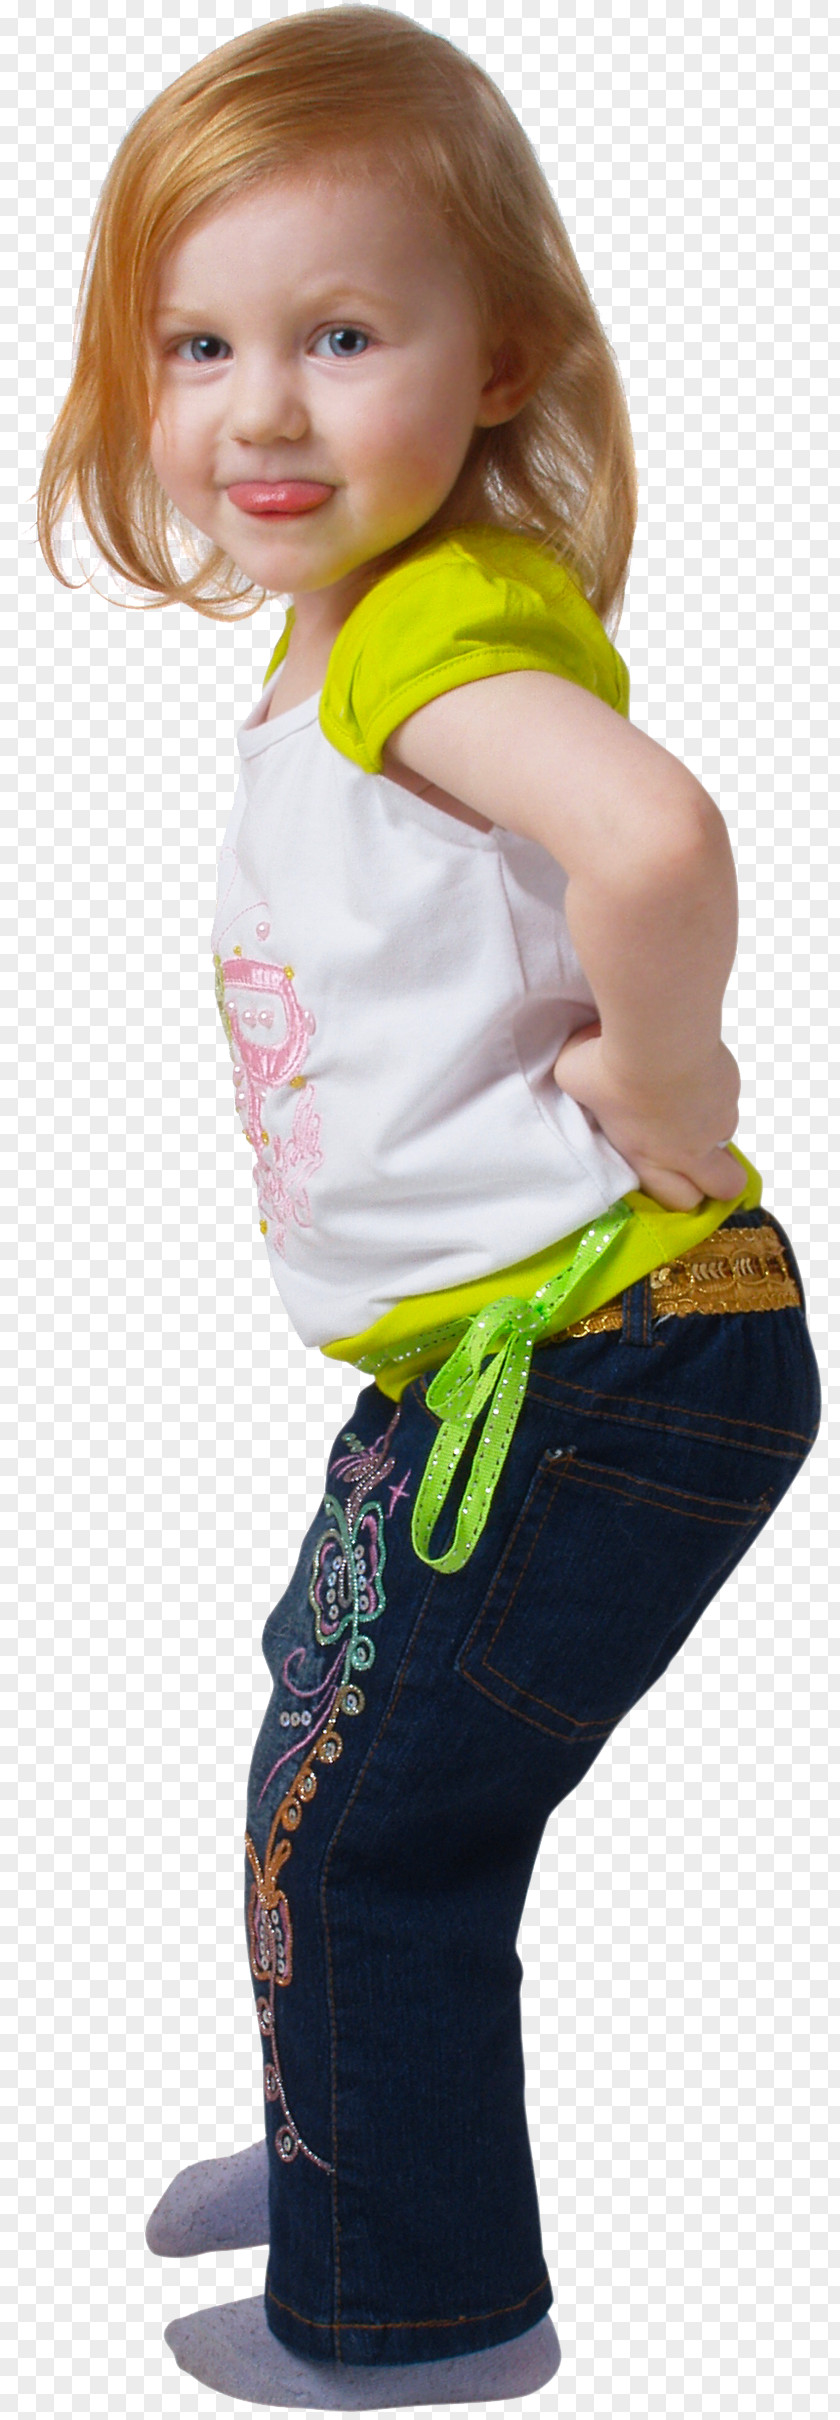 Muslem Chil Child Toy Taobao T-shirt PNG